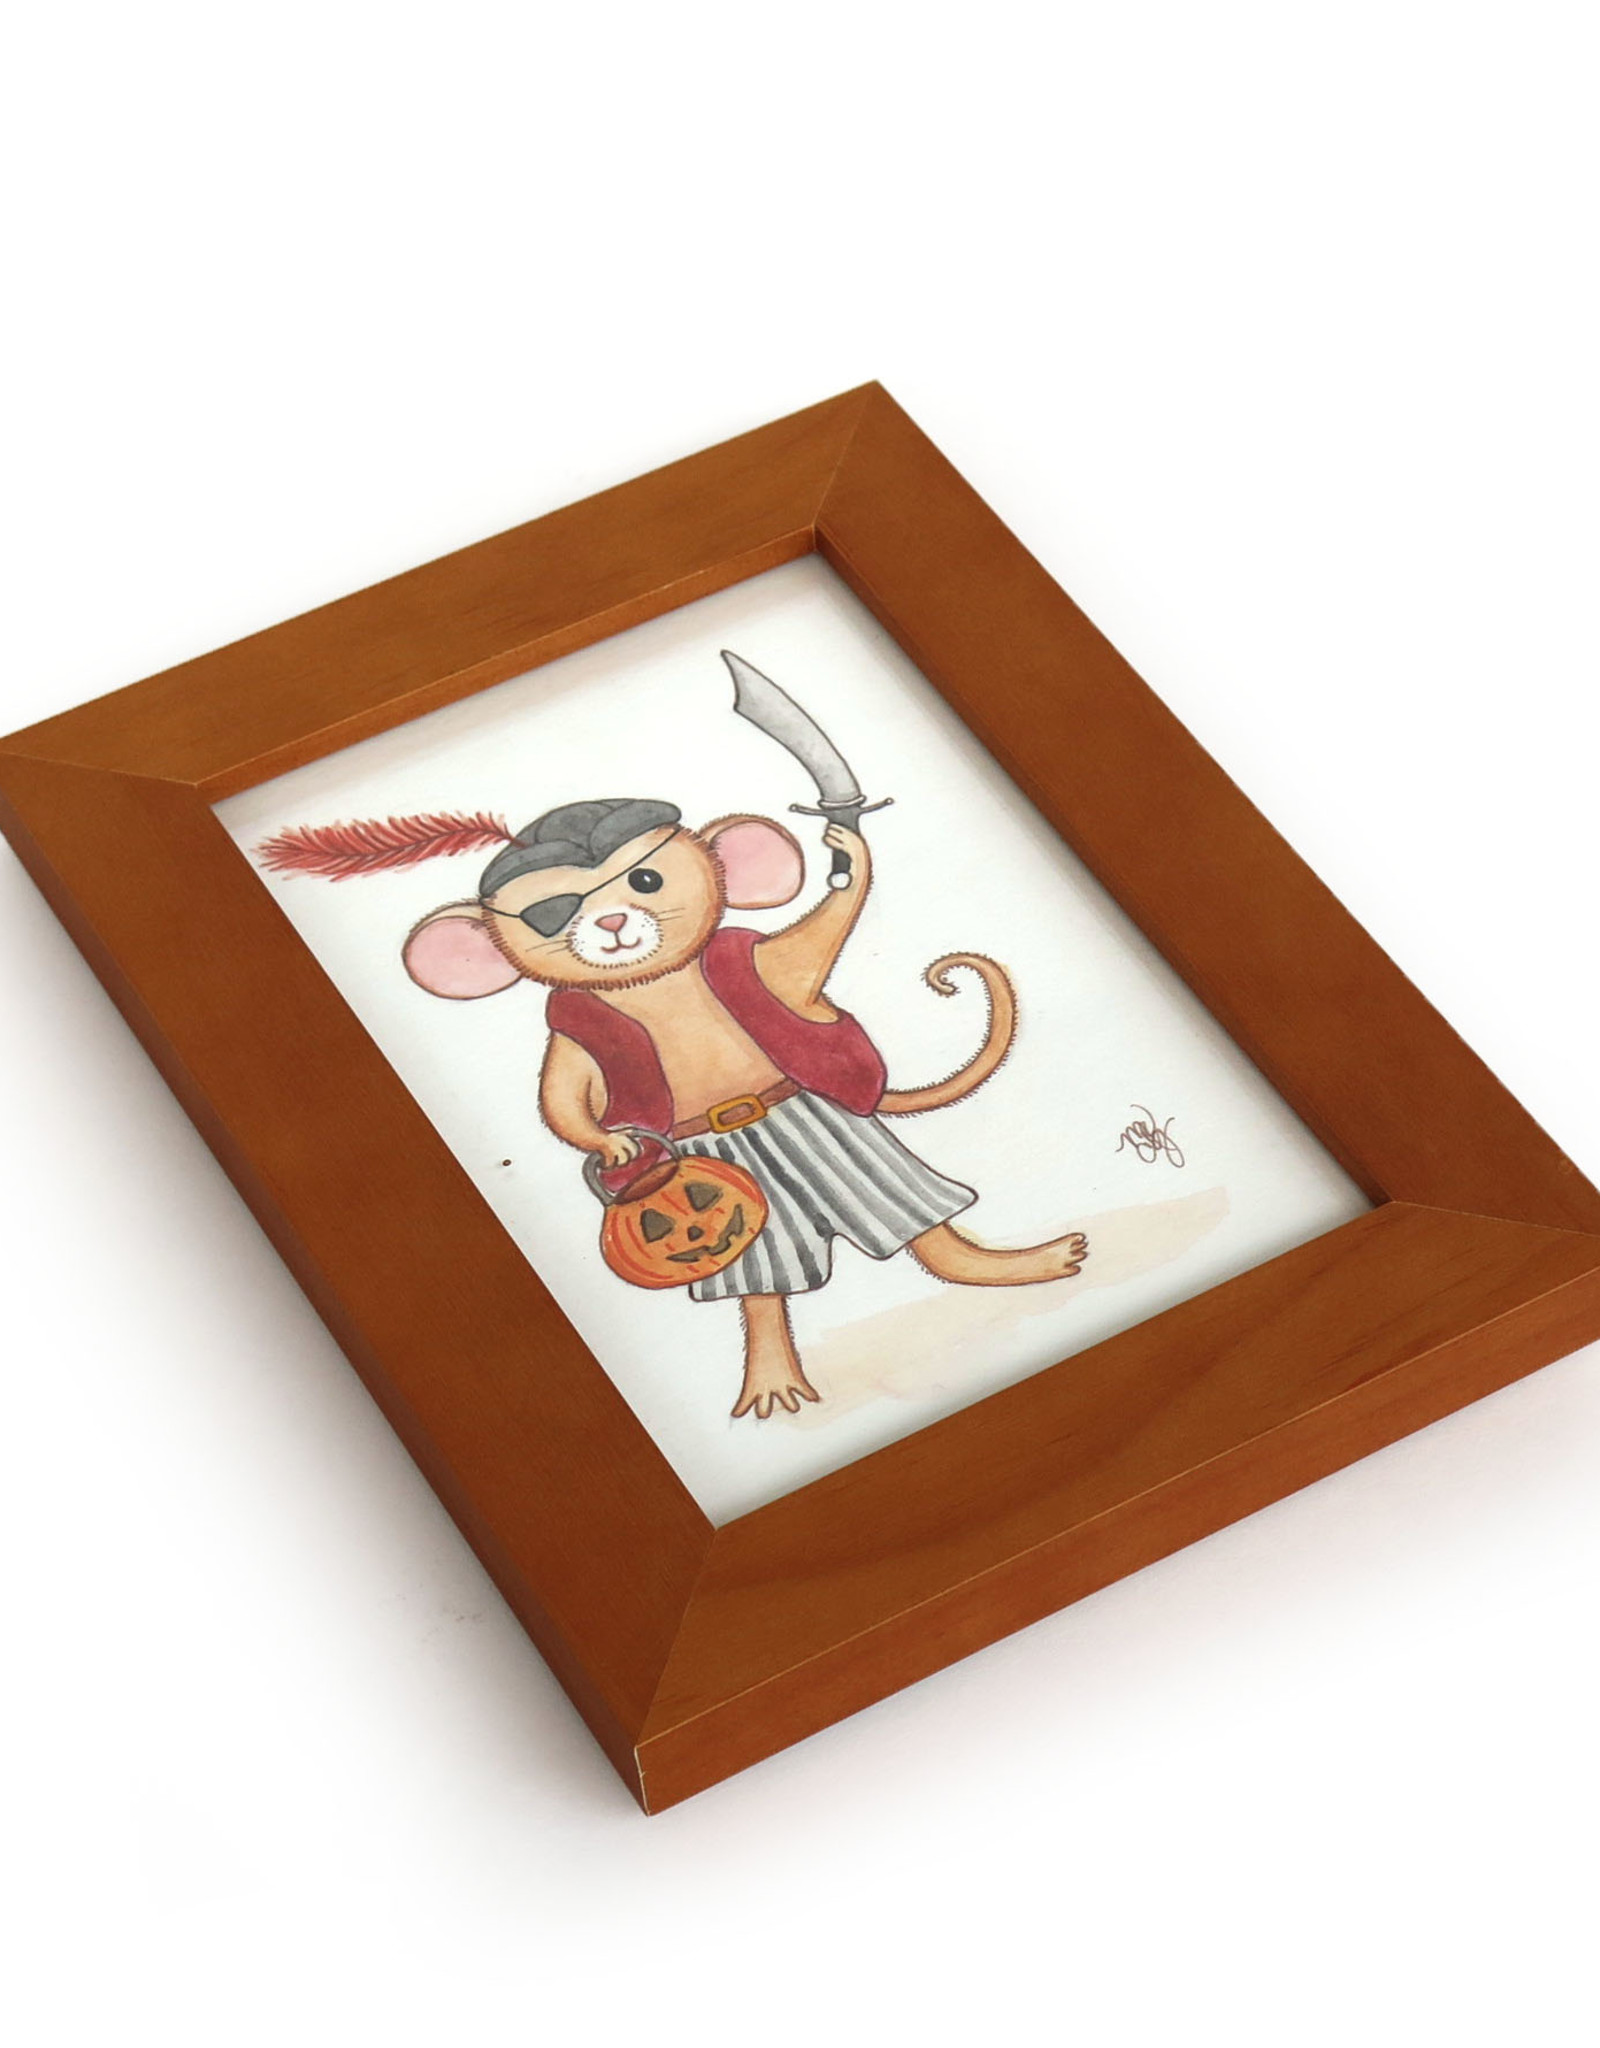 Melissa Rohr Gindling “Pirate Mouse“ Mini Illustration by Melissa Rohr